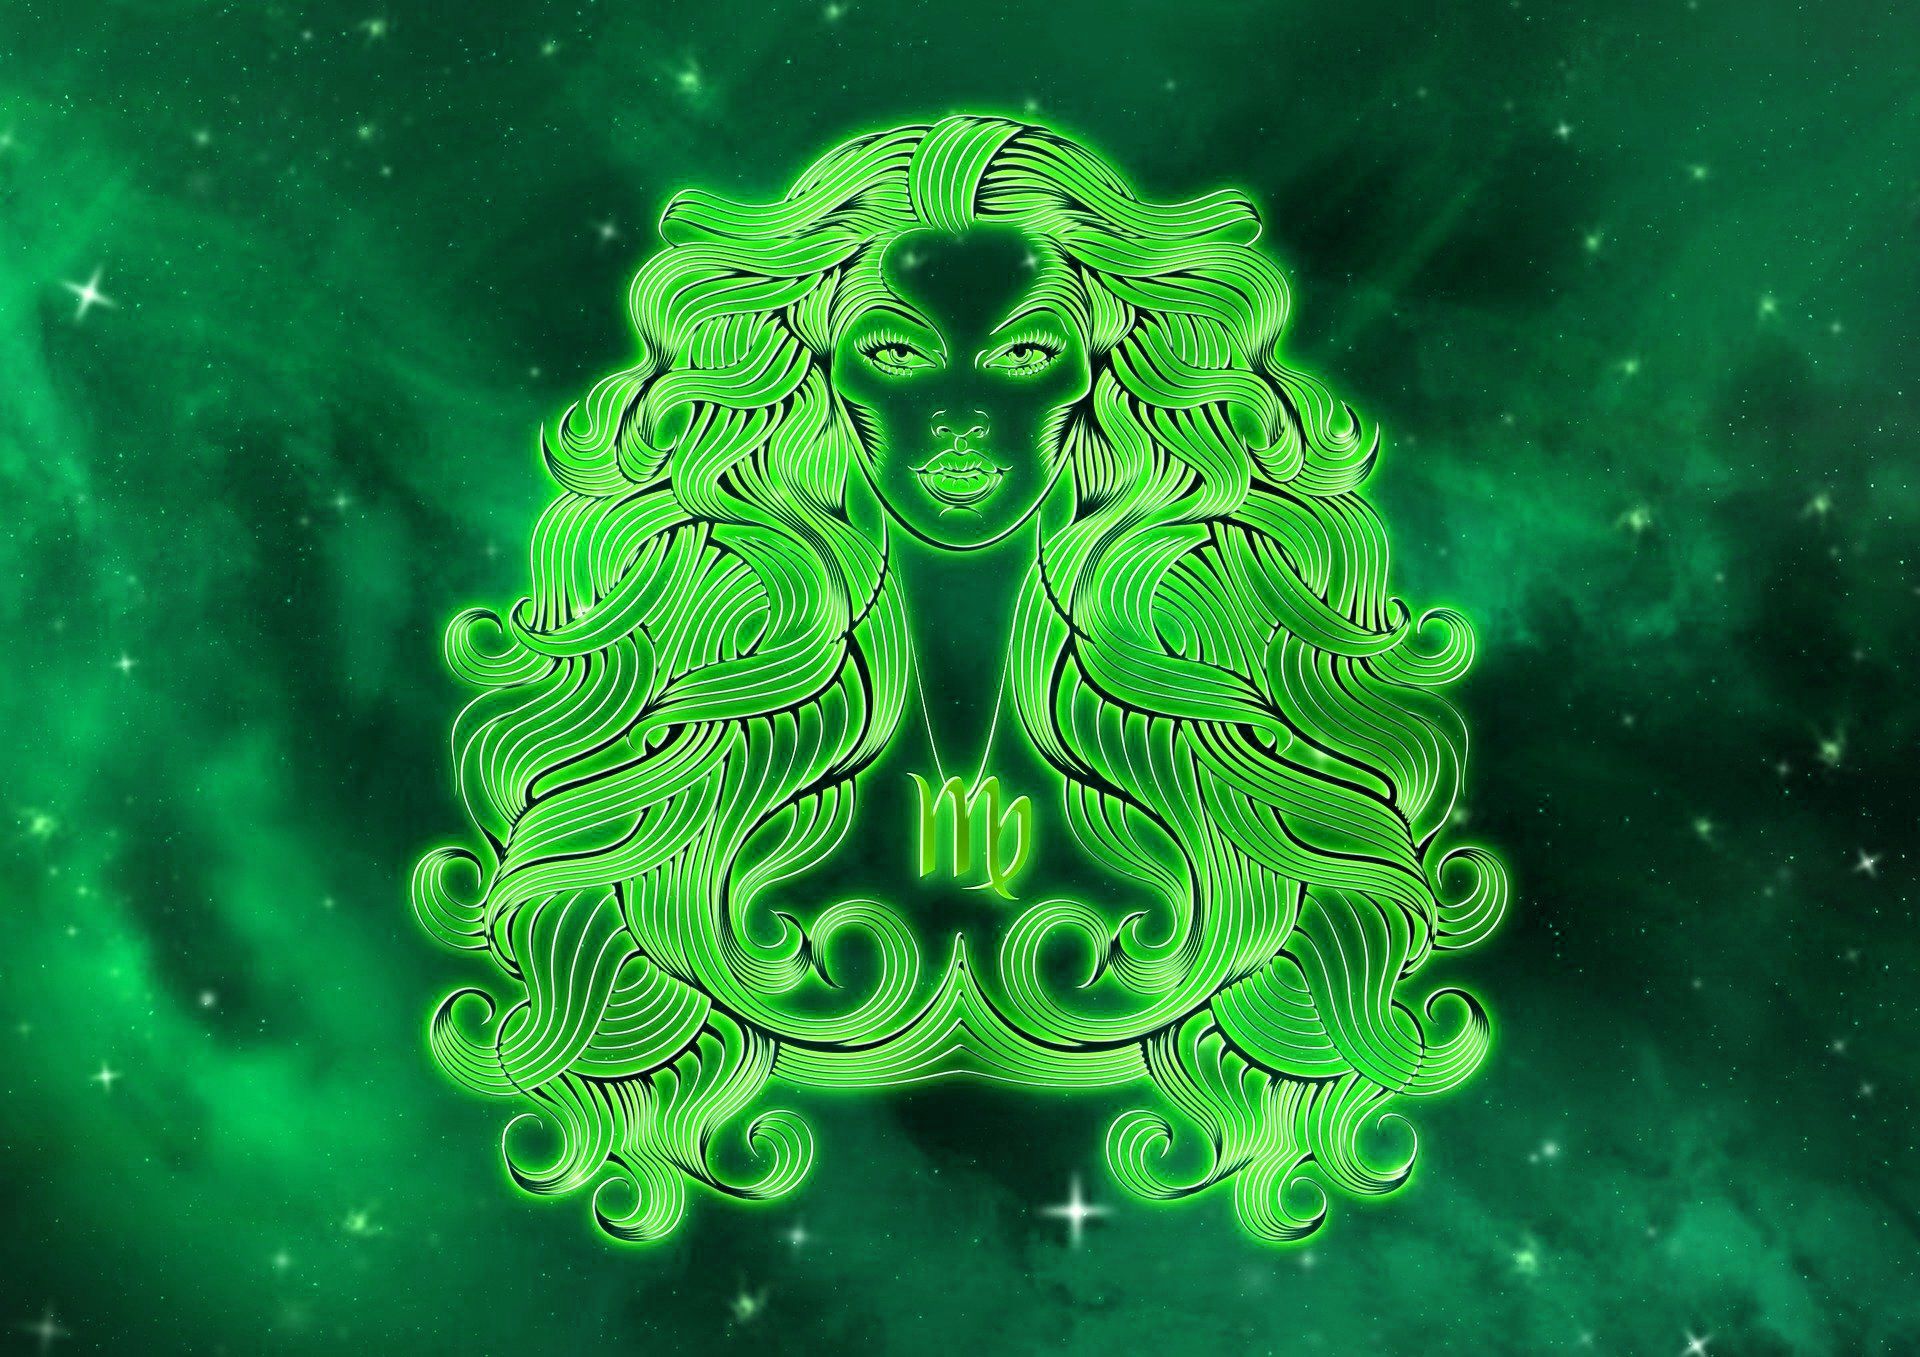 A graphic of a woman with long curly hair and a green background - Virgo